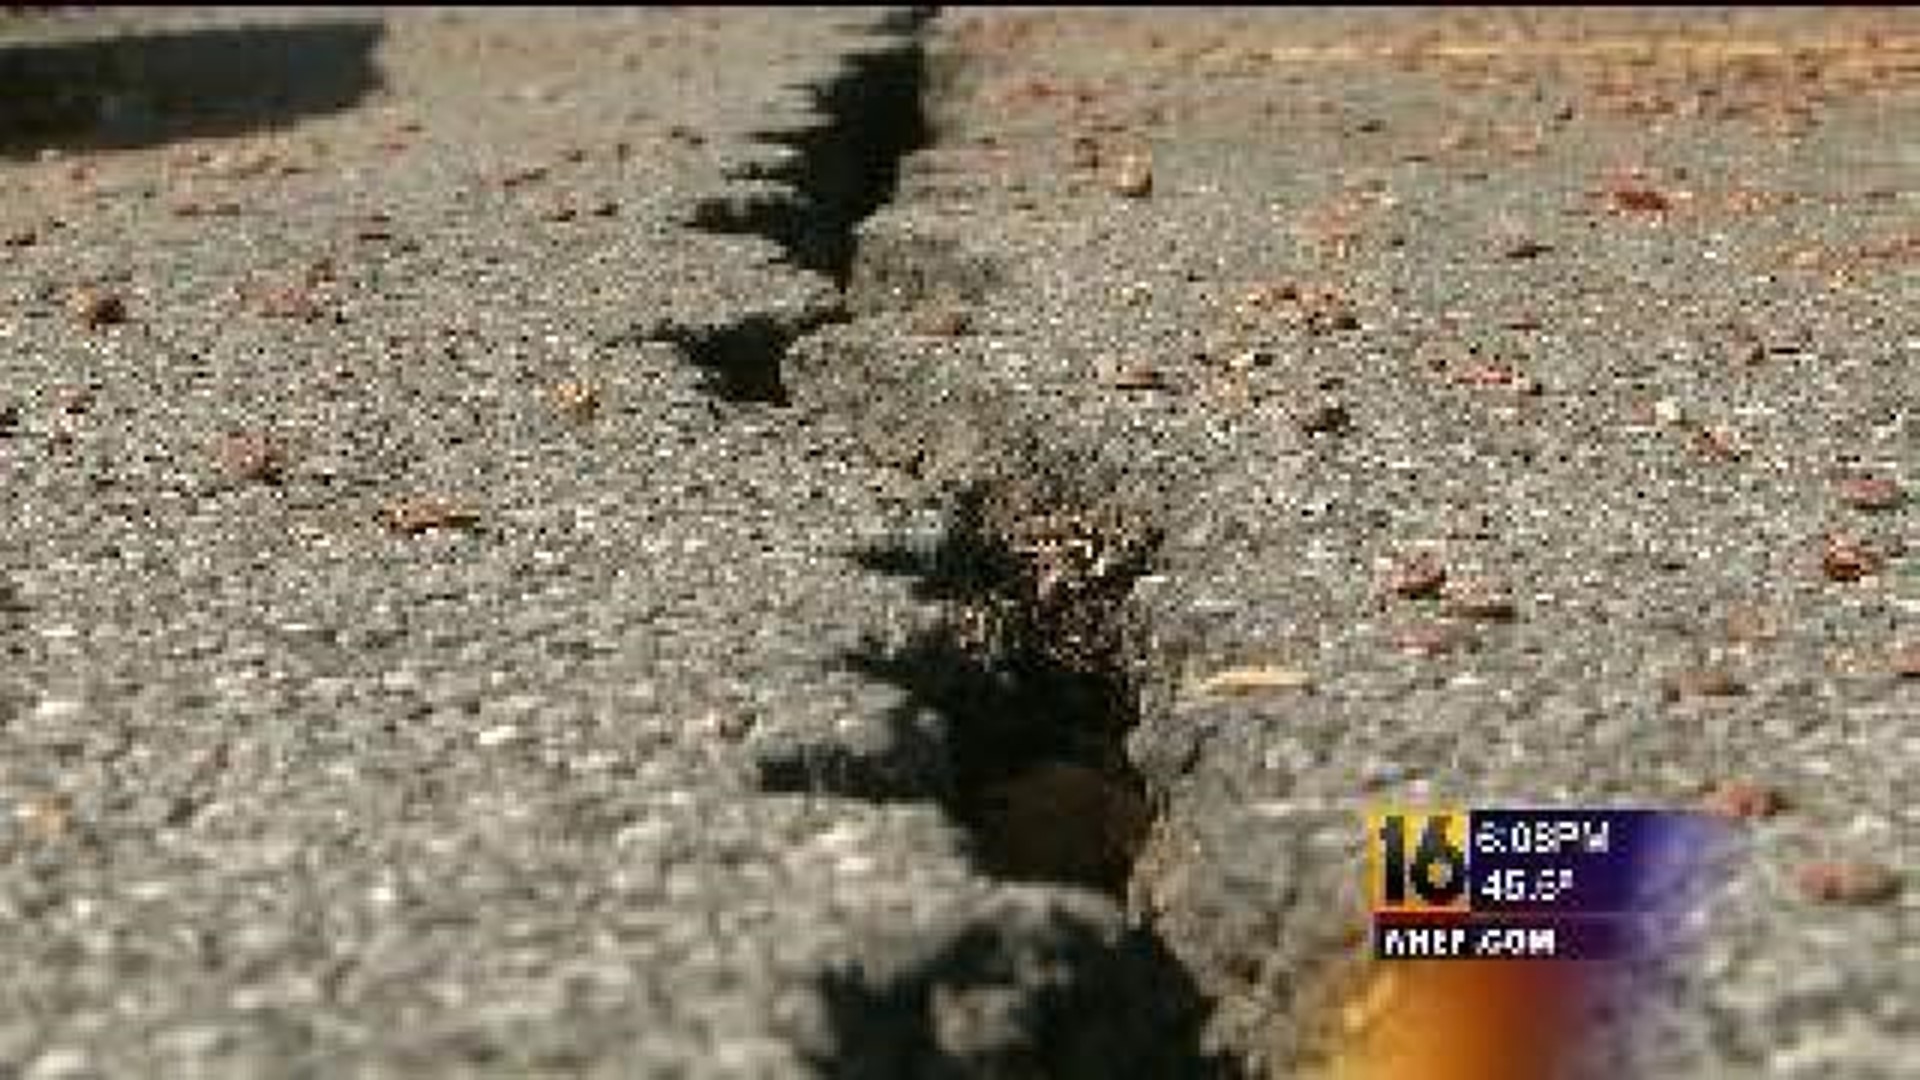 Neighbors: Oliver Street is Crumbling